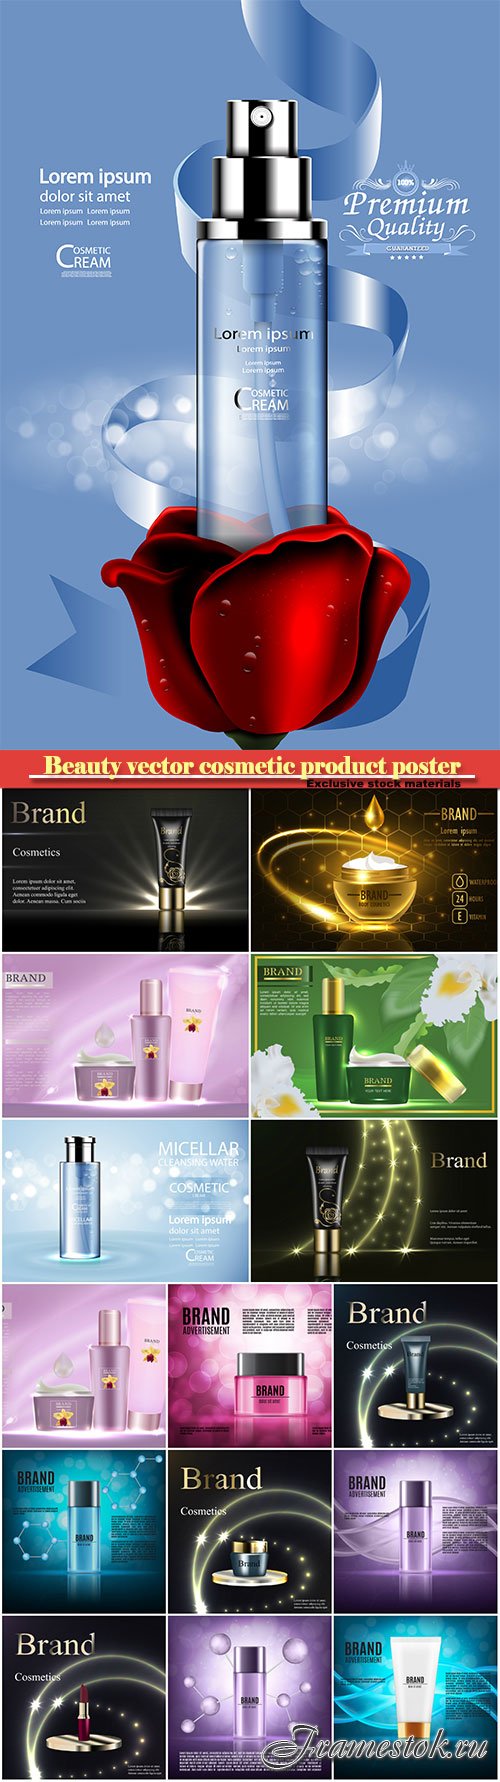 Beauty vector cosmetic product poster # 16